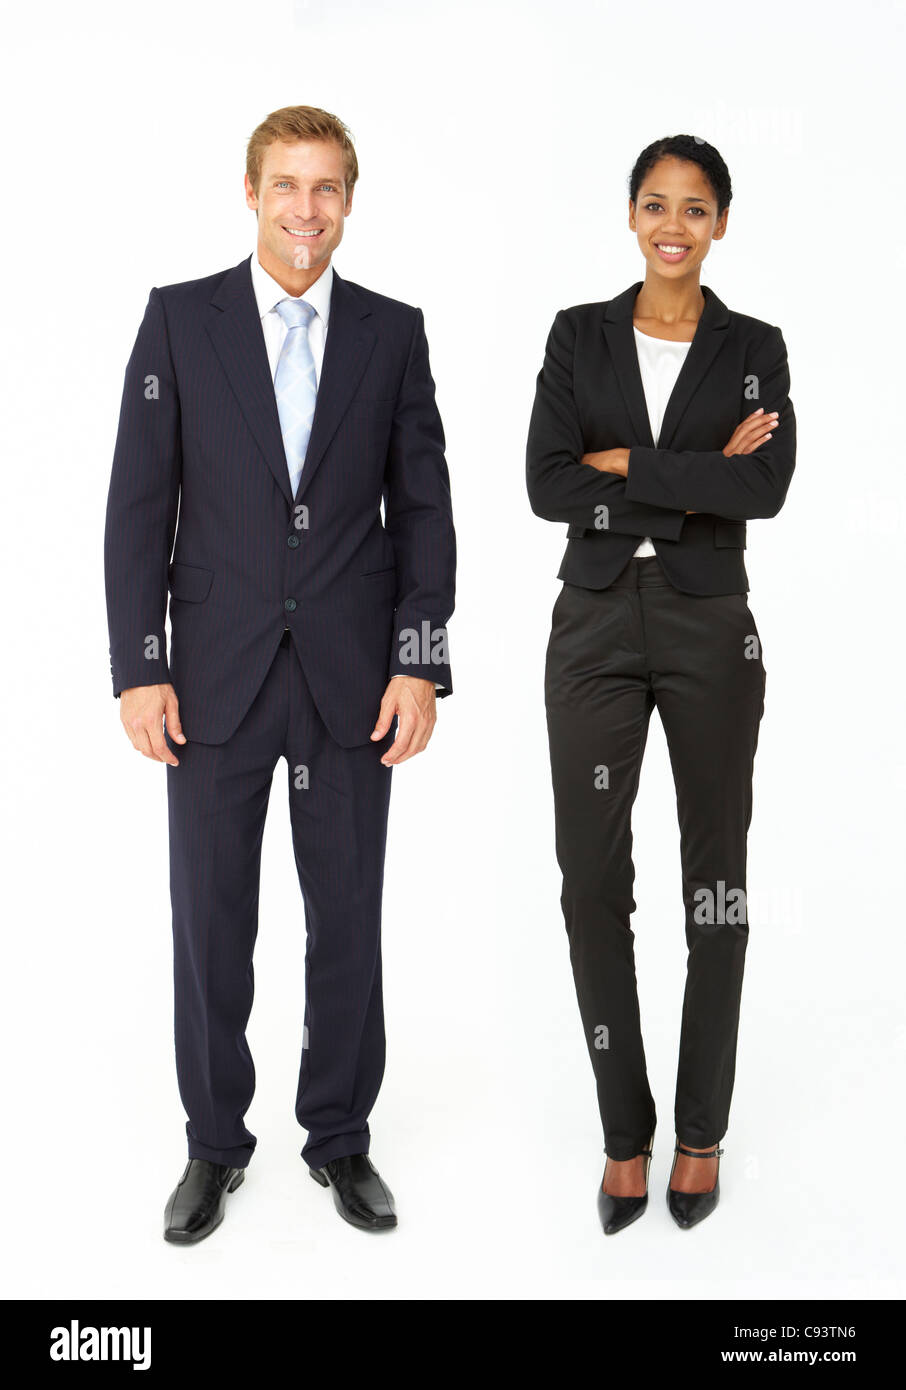 Smartly dressed businessman and woman Stock Photo